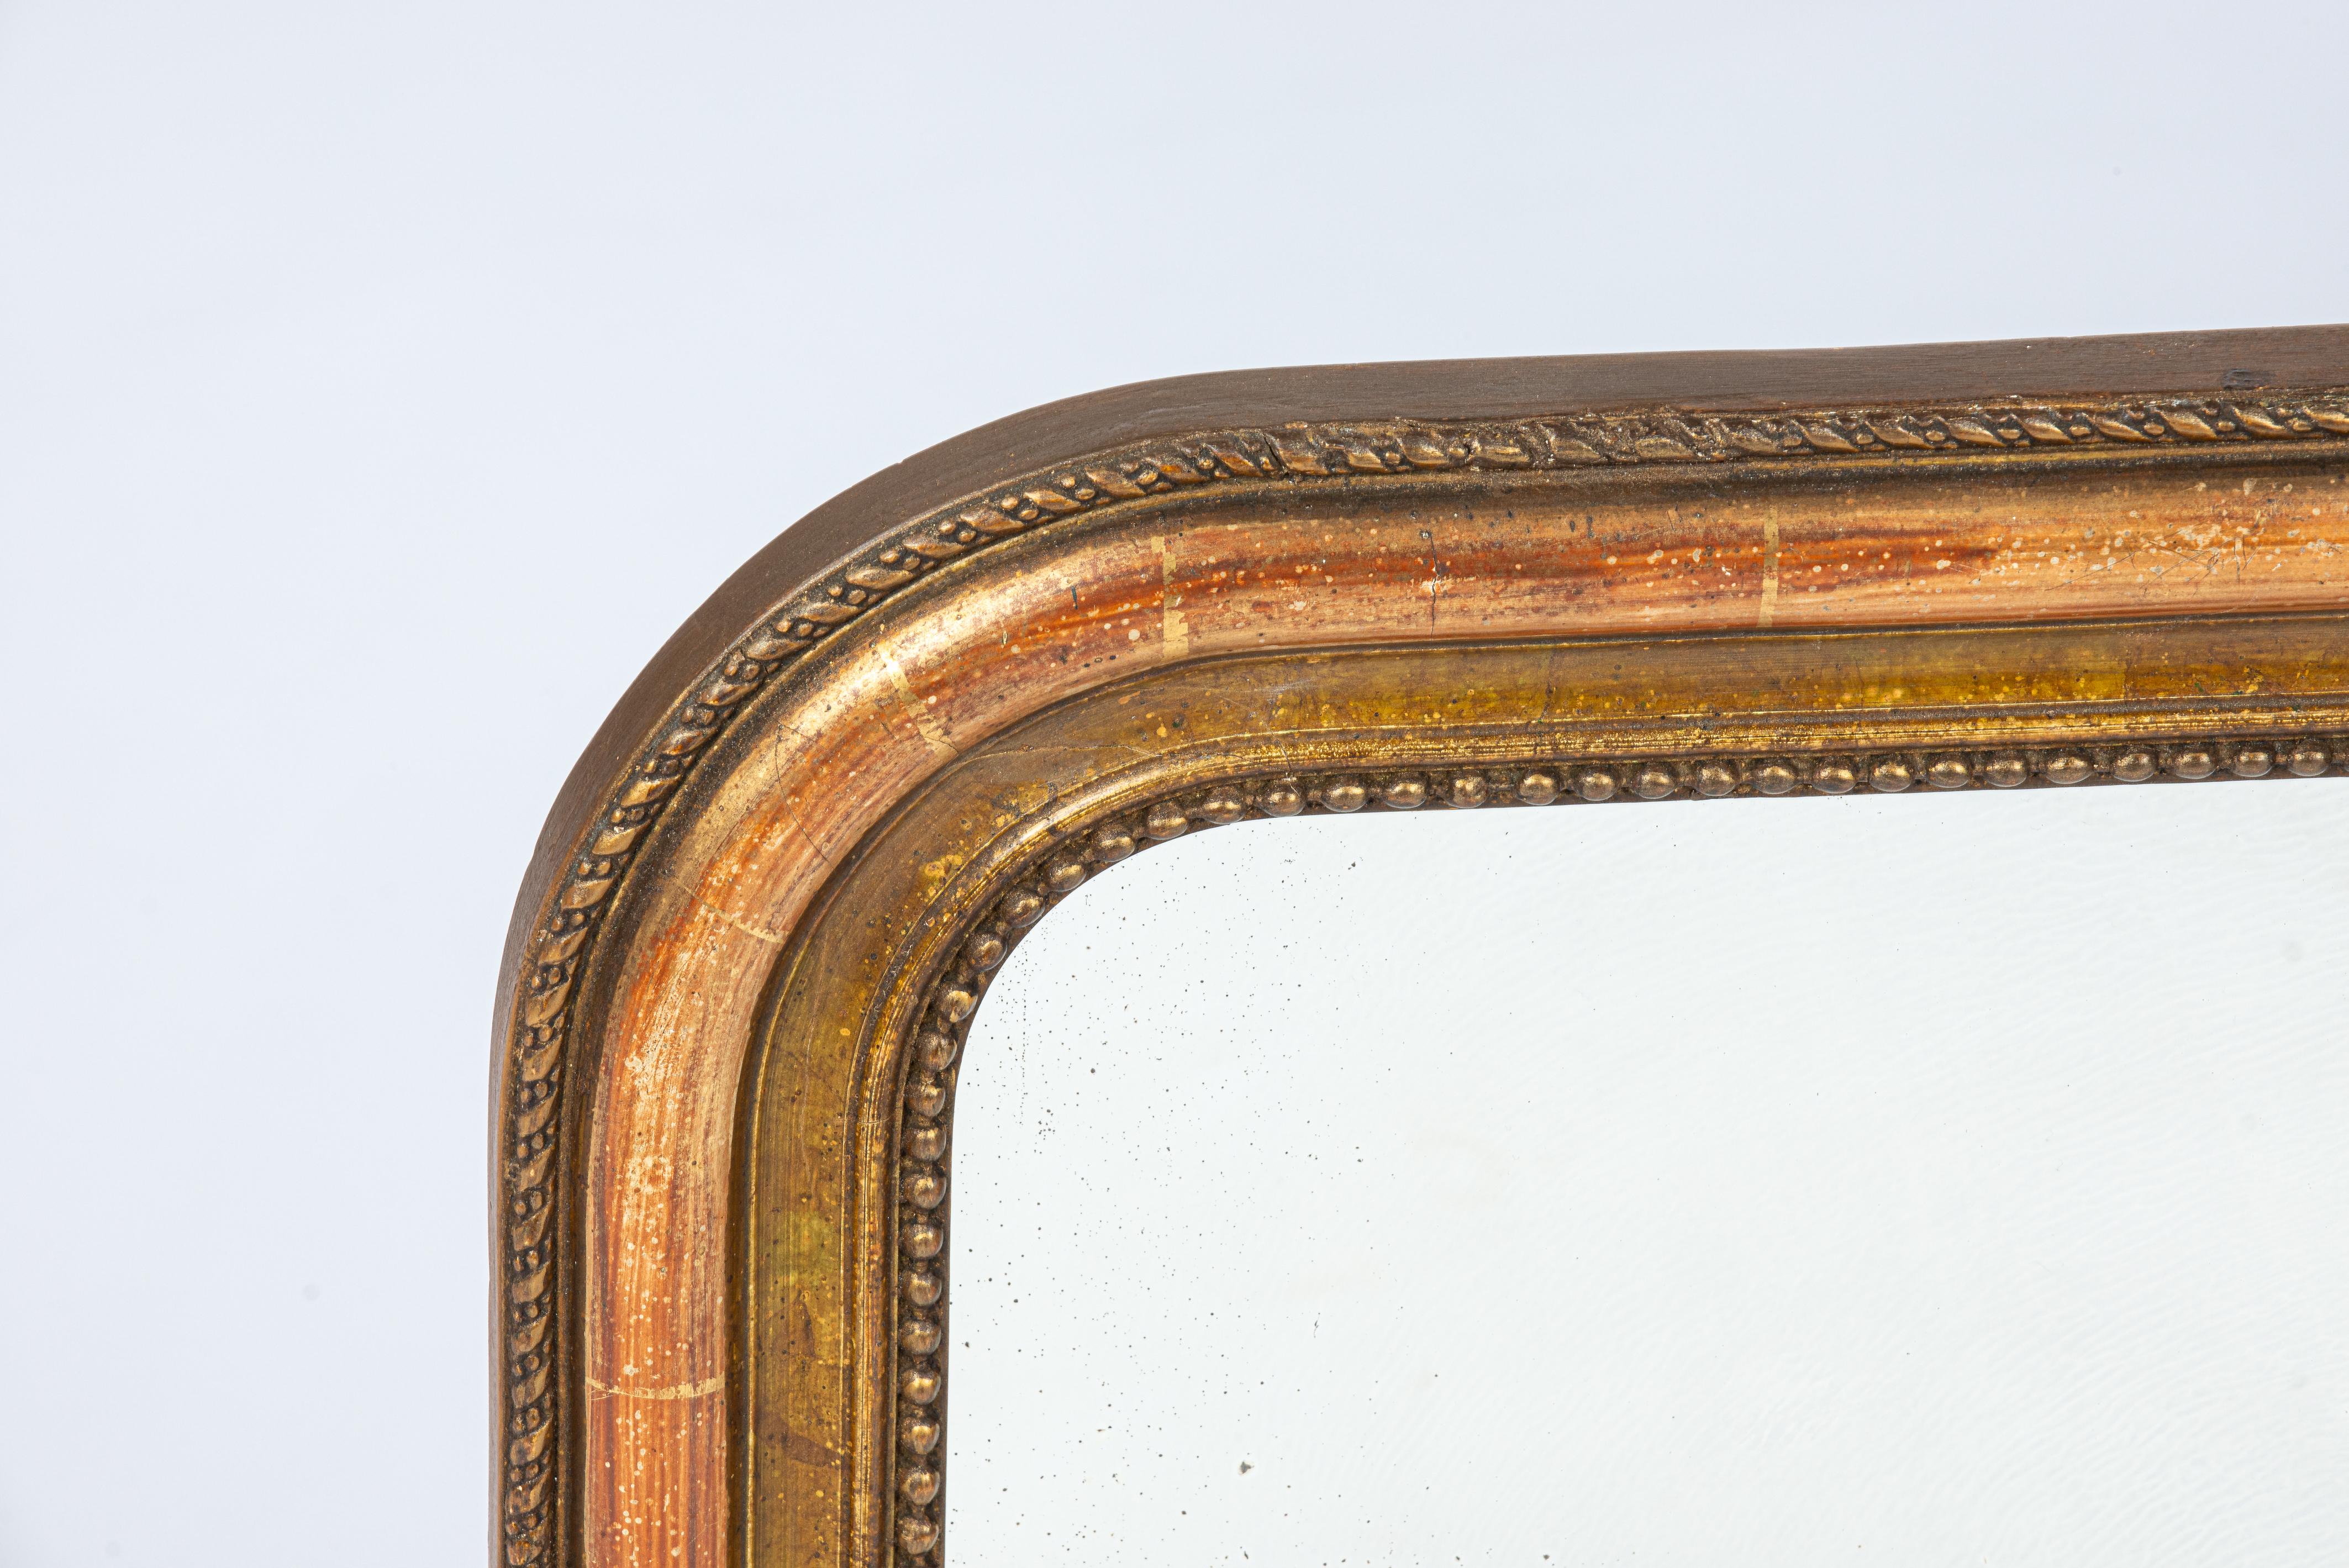 On offer here is a beautiful small antique mirror that was made in France in the second half of the 19th century, around 1880. The mirror frame has the upper rounded corners typical for Louis Philippe mirrors. A delicate pearl beading surrounds the